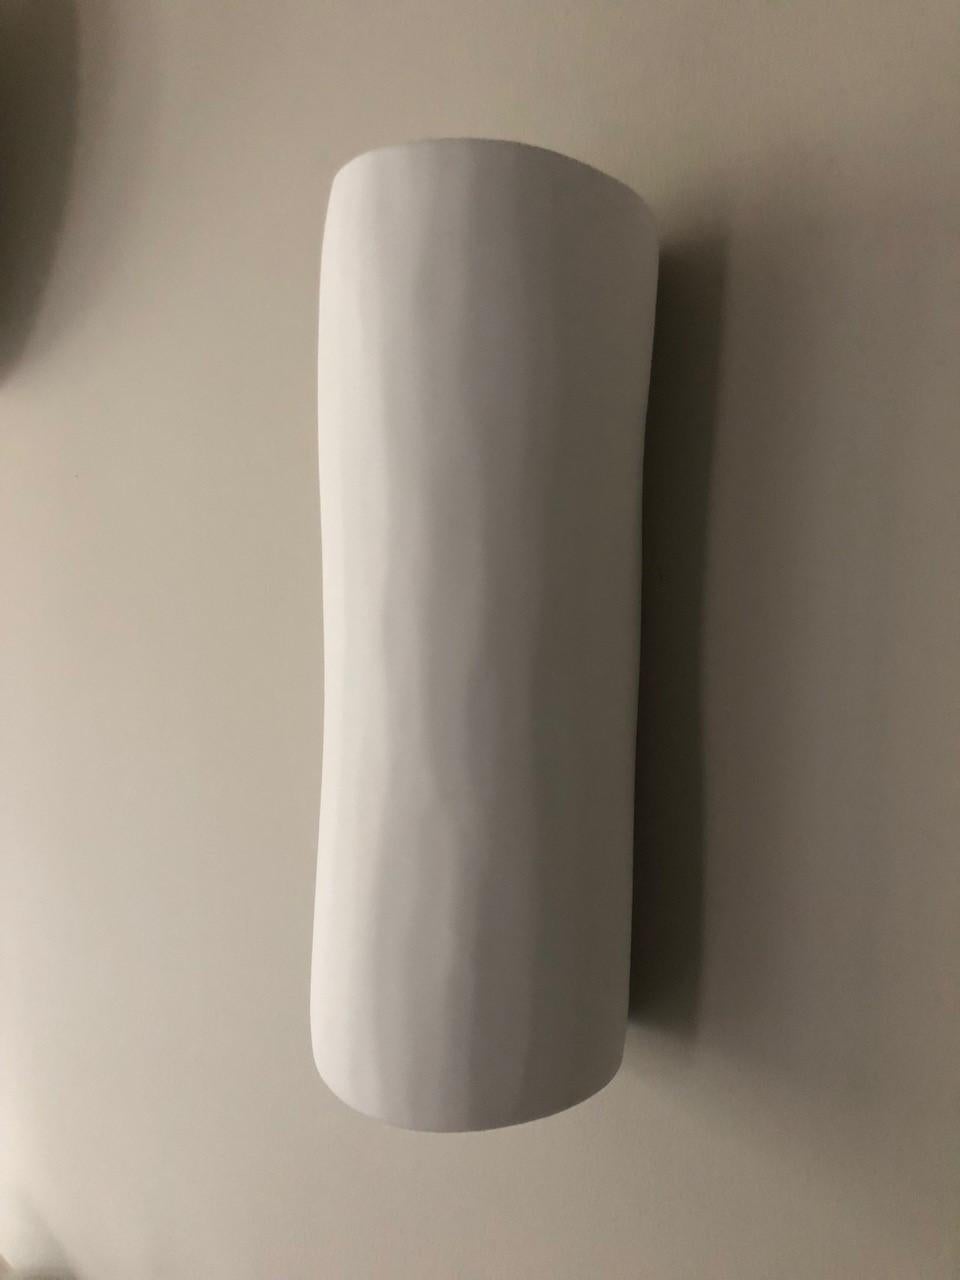 Serenity Contemporary Wall Sconce, Wall Light, White Plaster, Hannah Woodhouse In New Condition For Sale In London, GB